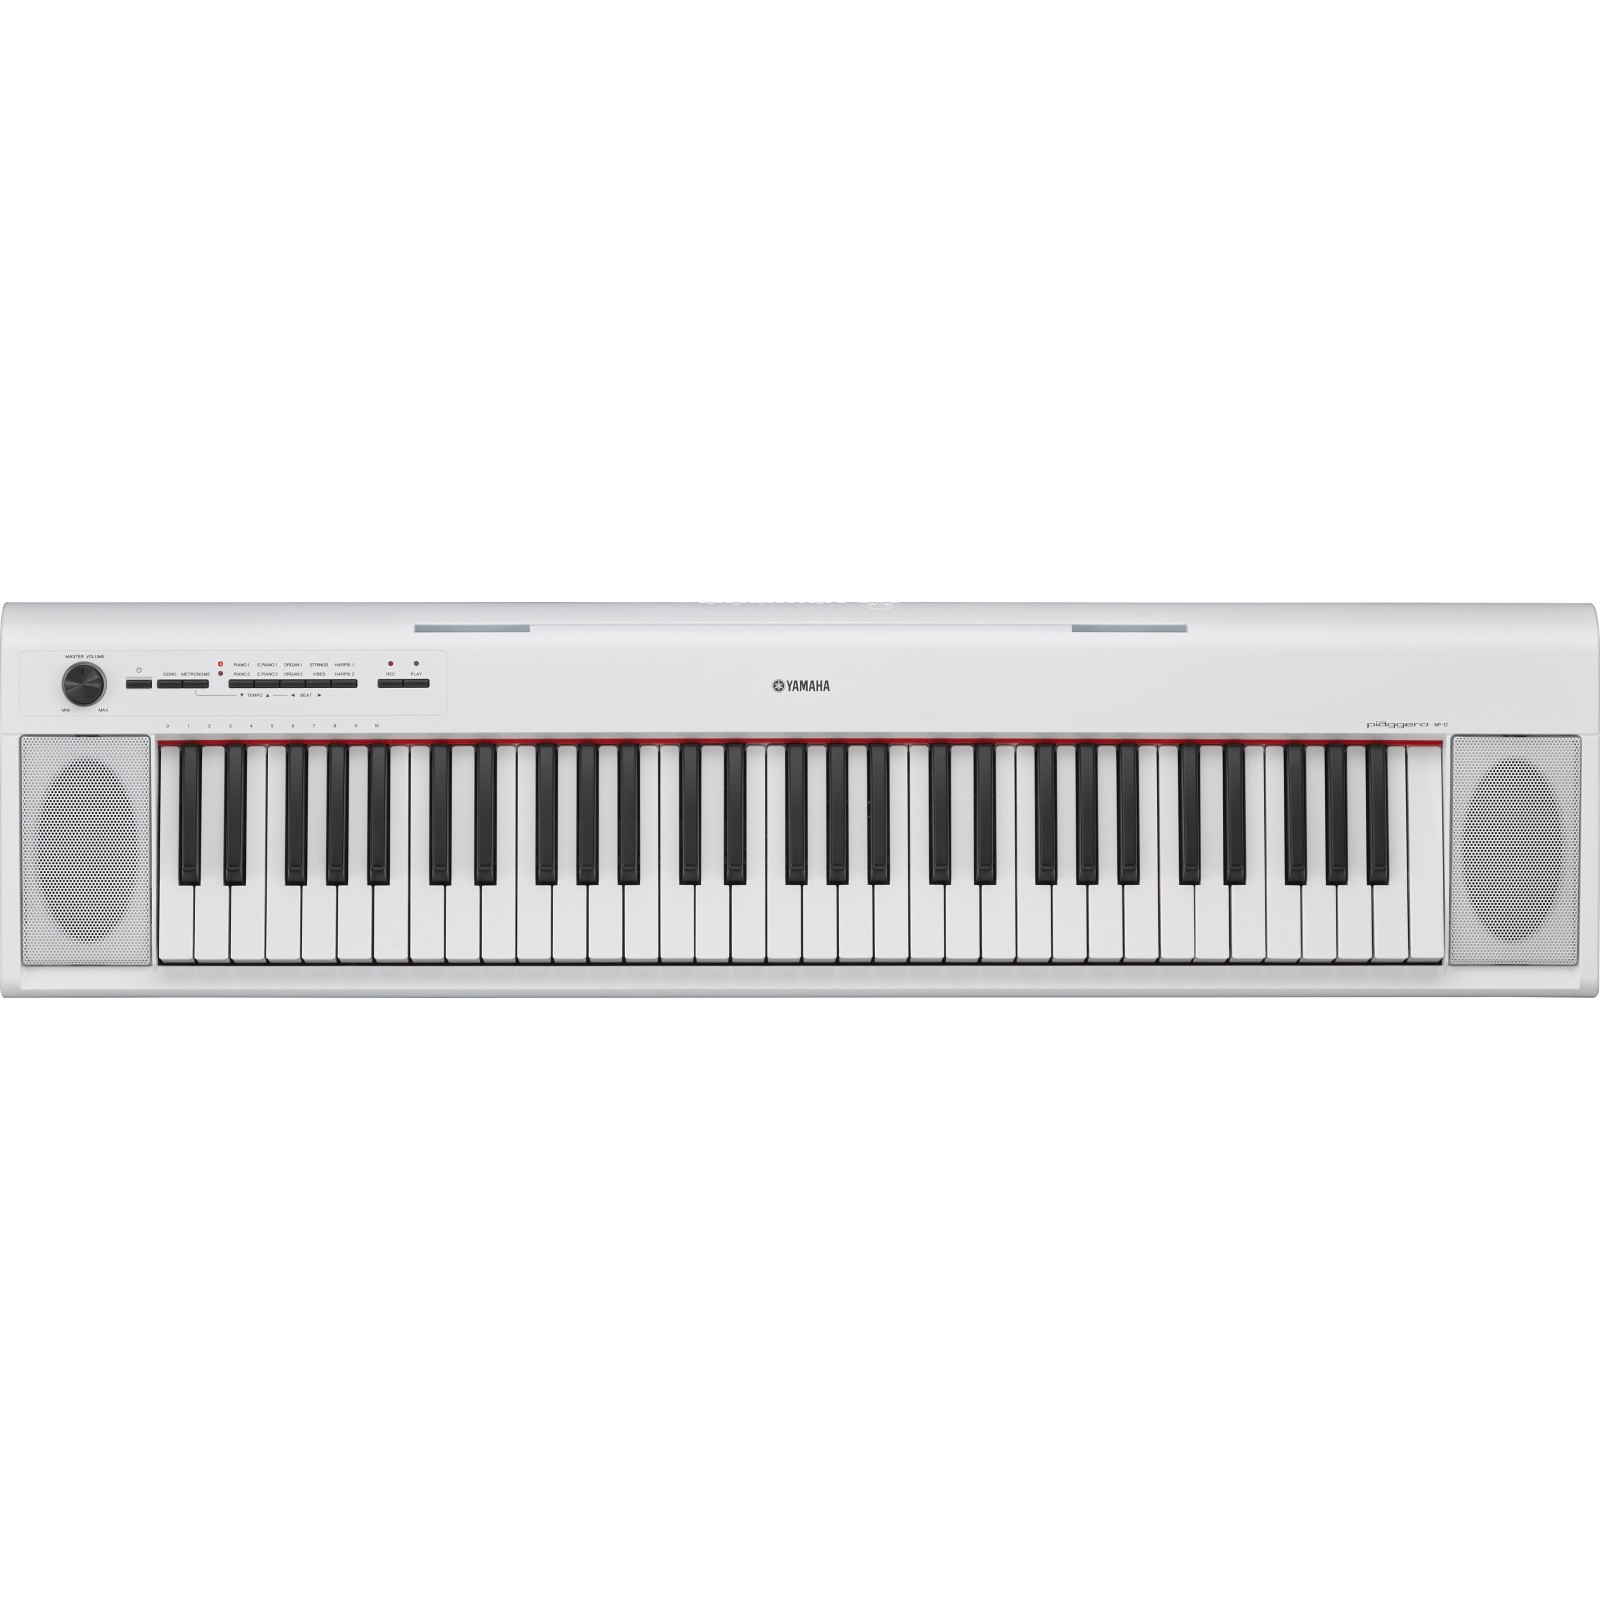 https://www.musicpromusic.com/51463-thickbox_default/yamaha-np-12wh-piano-numerique-portable-blanc-a-61-touches-dynamiques.jpg